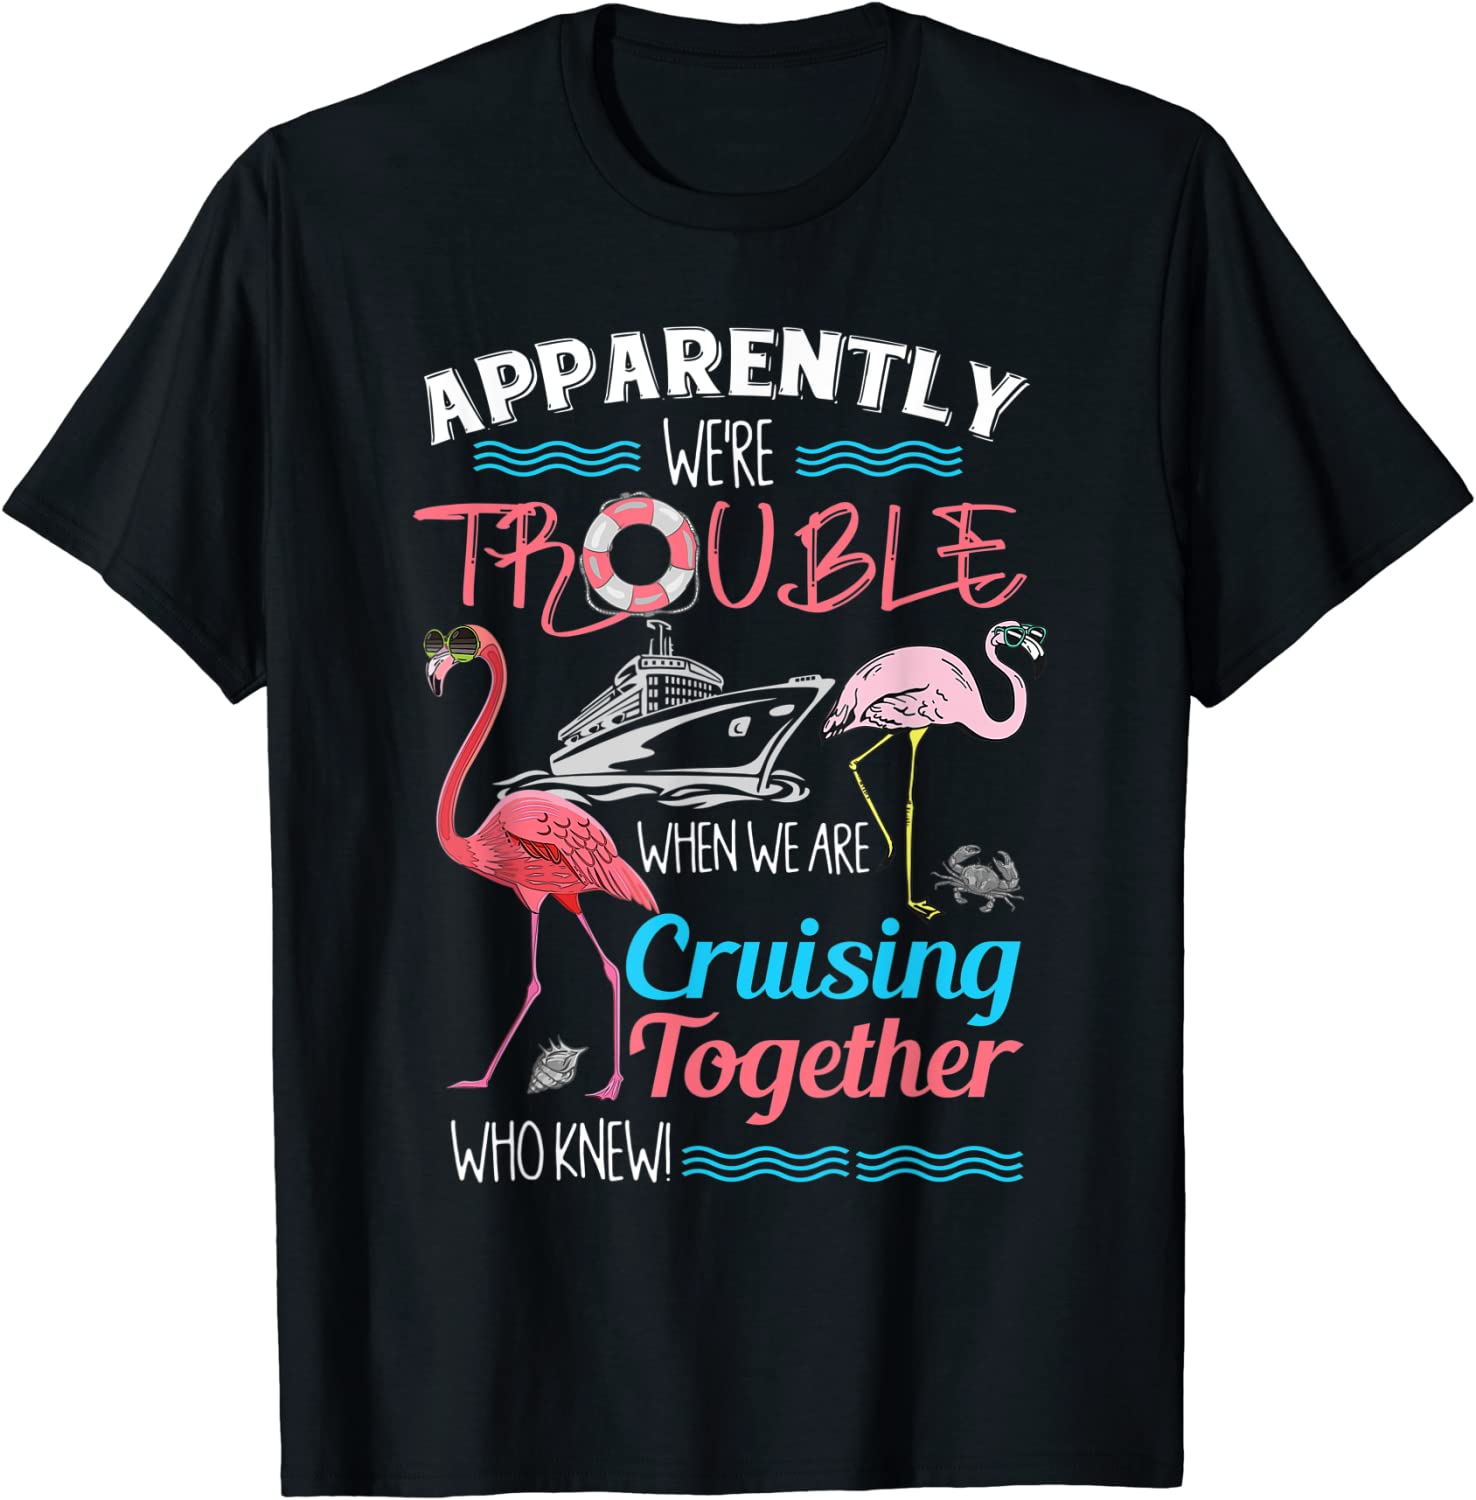 Apparently We're Trouble When We Are Cruising Together T-Shirt - Ellie ...